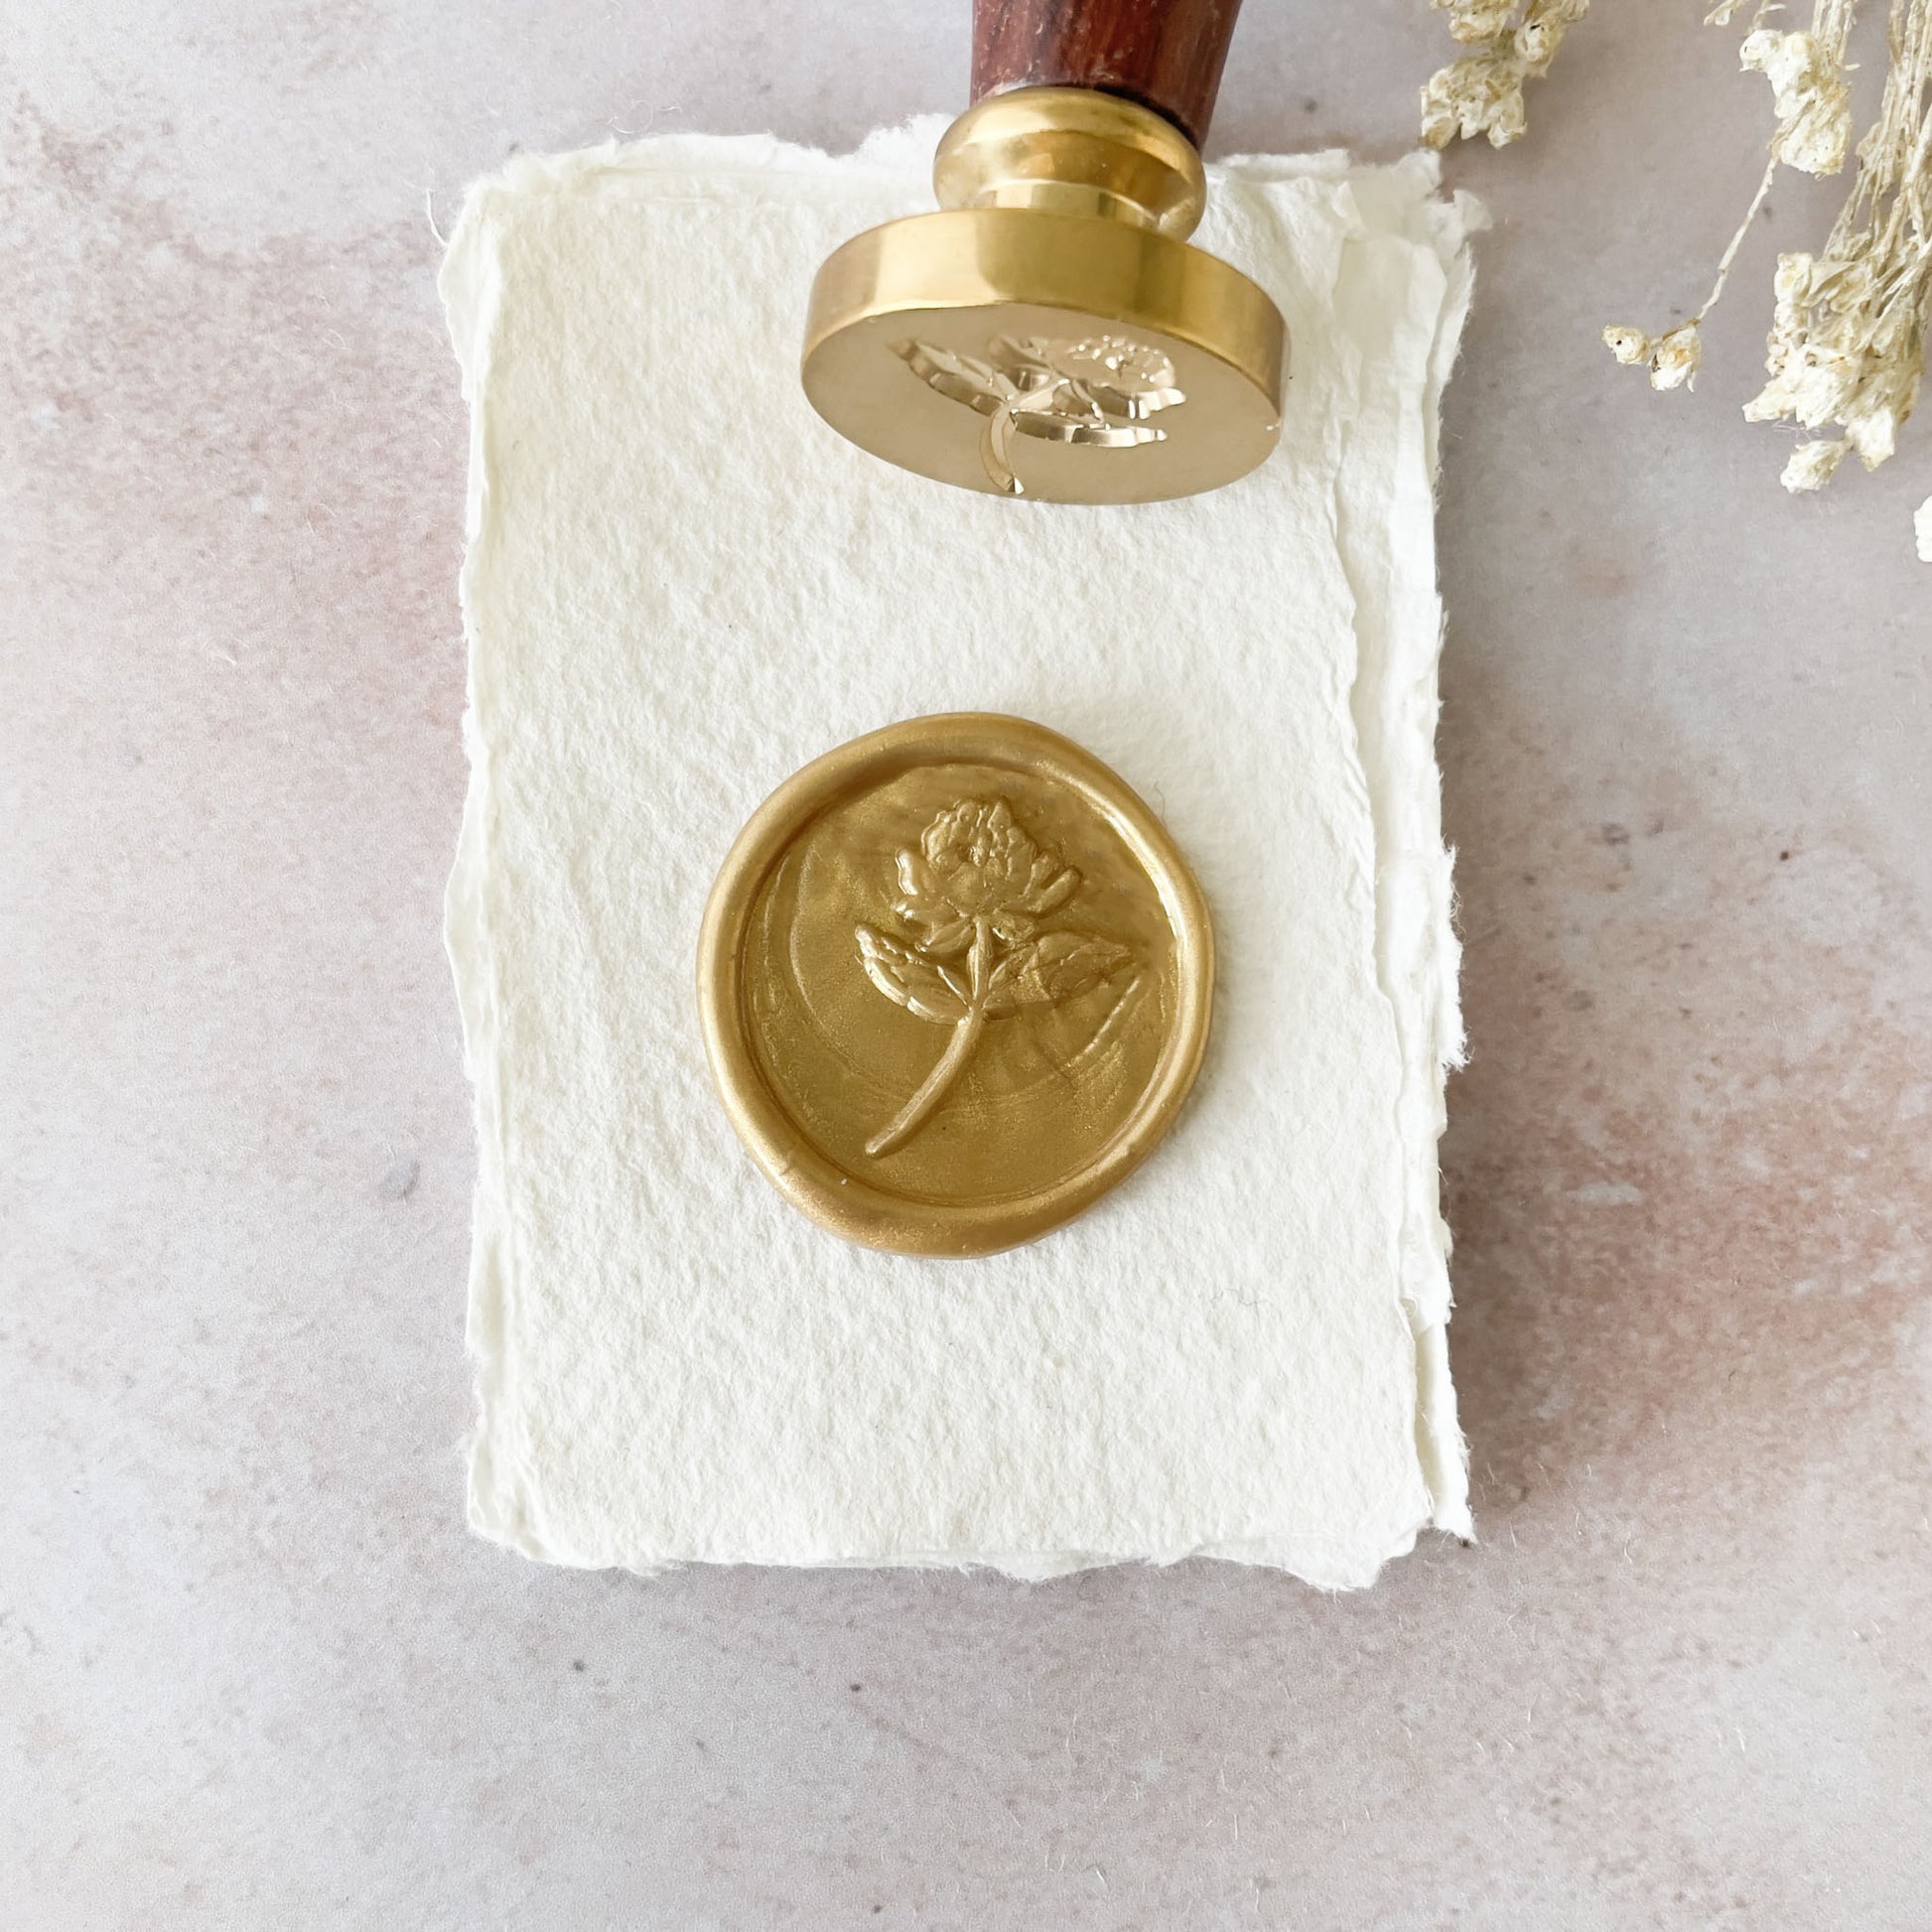 Peony Flower Floral Botanical Wax Seal Stamp